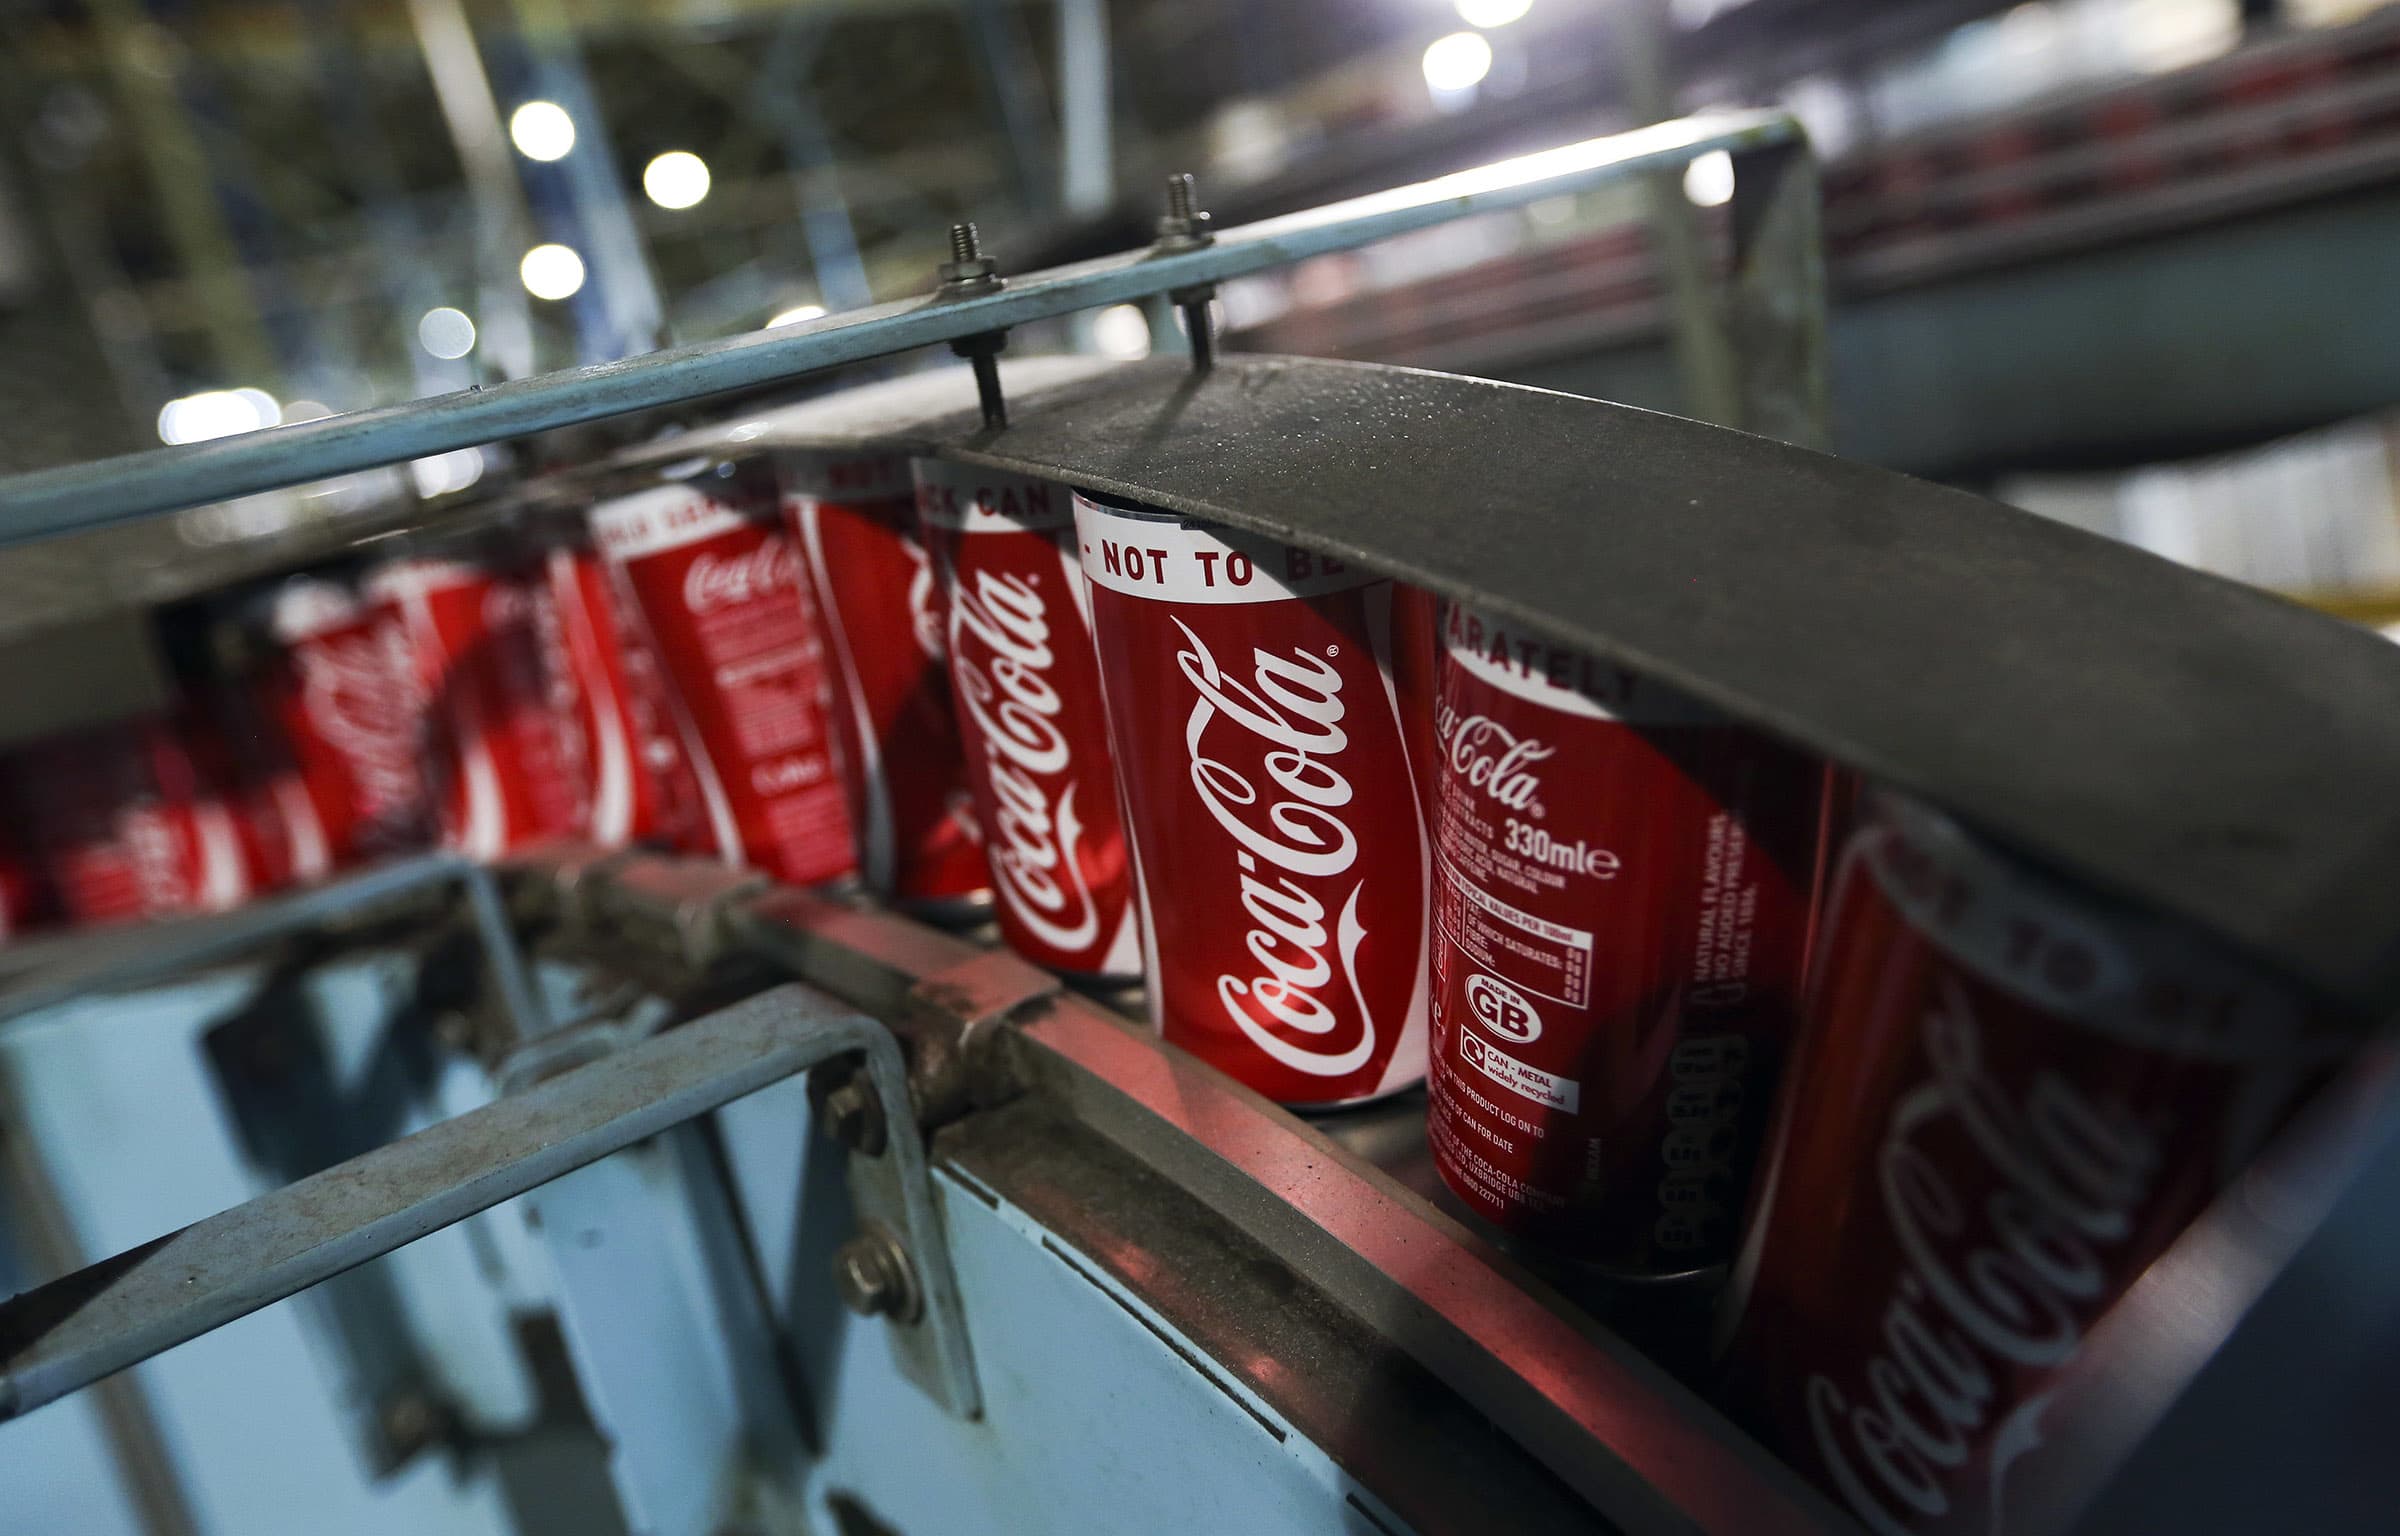 Coca-Cola will lower 2,200 jobs worldwide as a part of restructuring plan